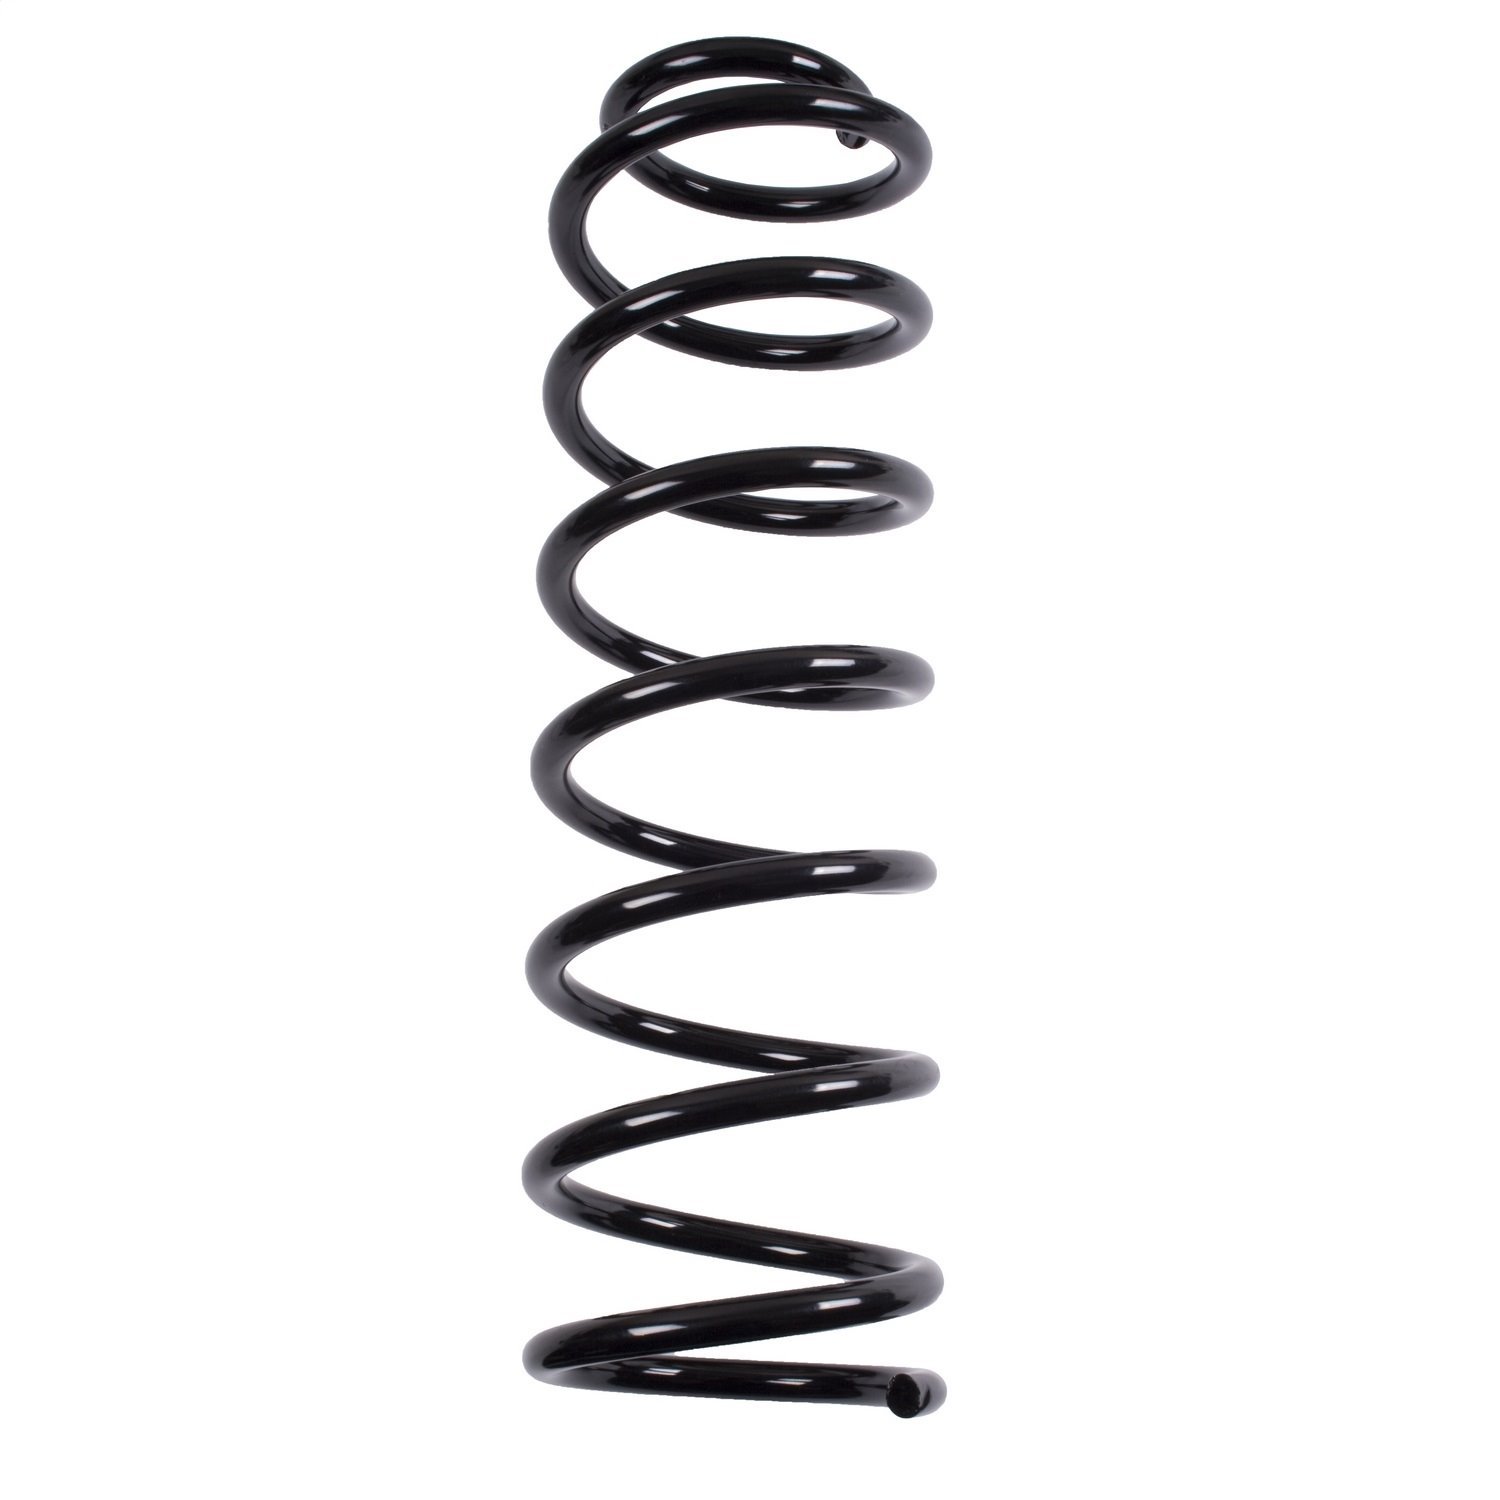 Stock replacement front coil spring from Omix-ADA, Fits 97-06 Jeep Wrangler TJ